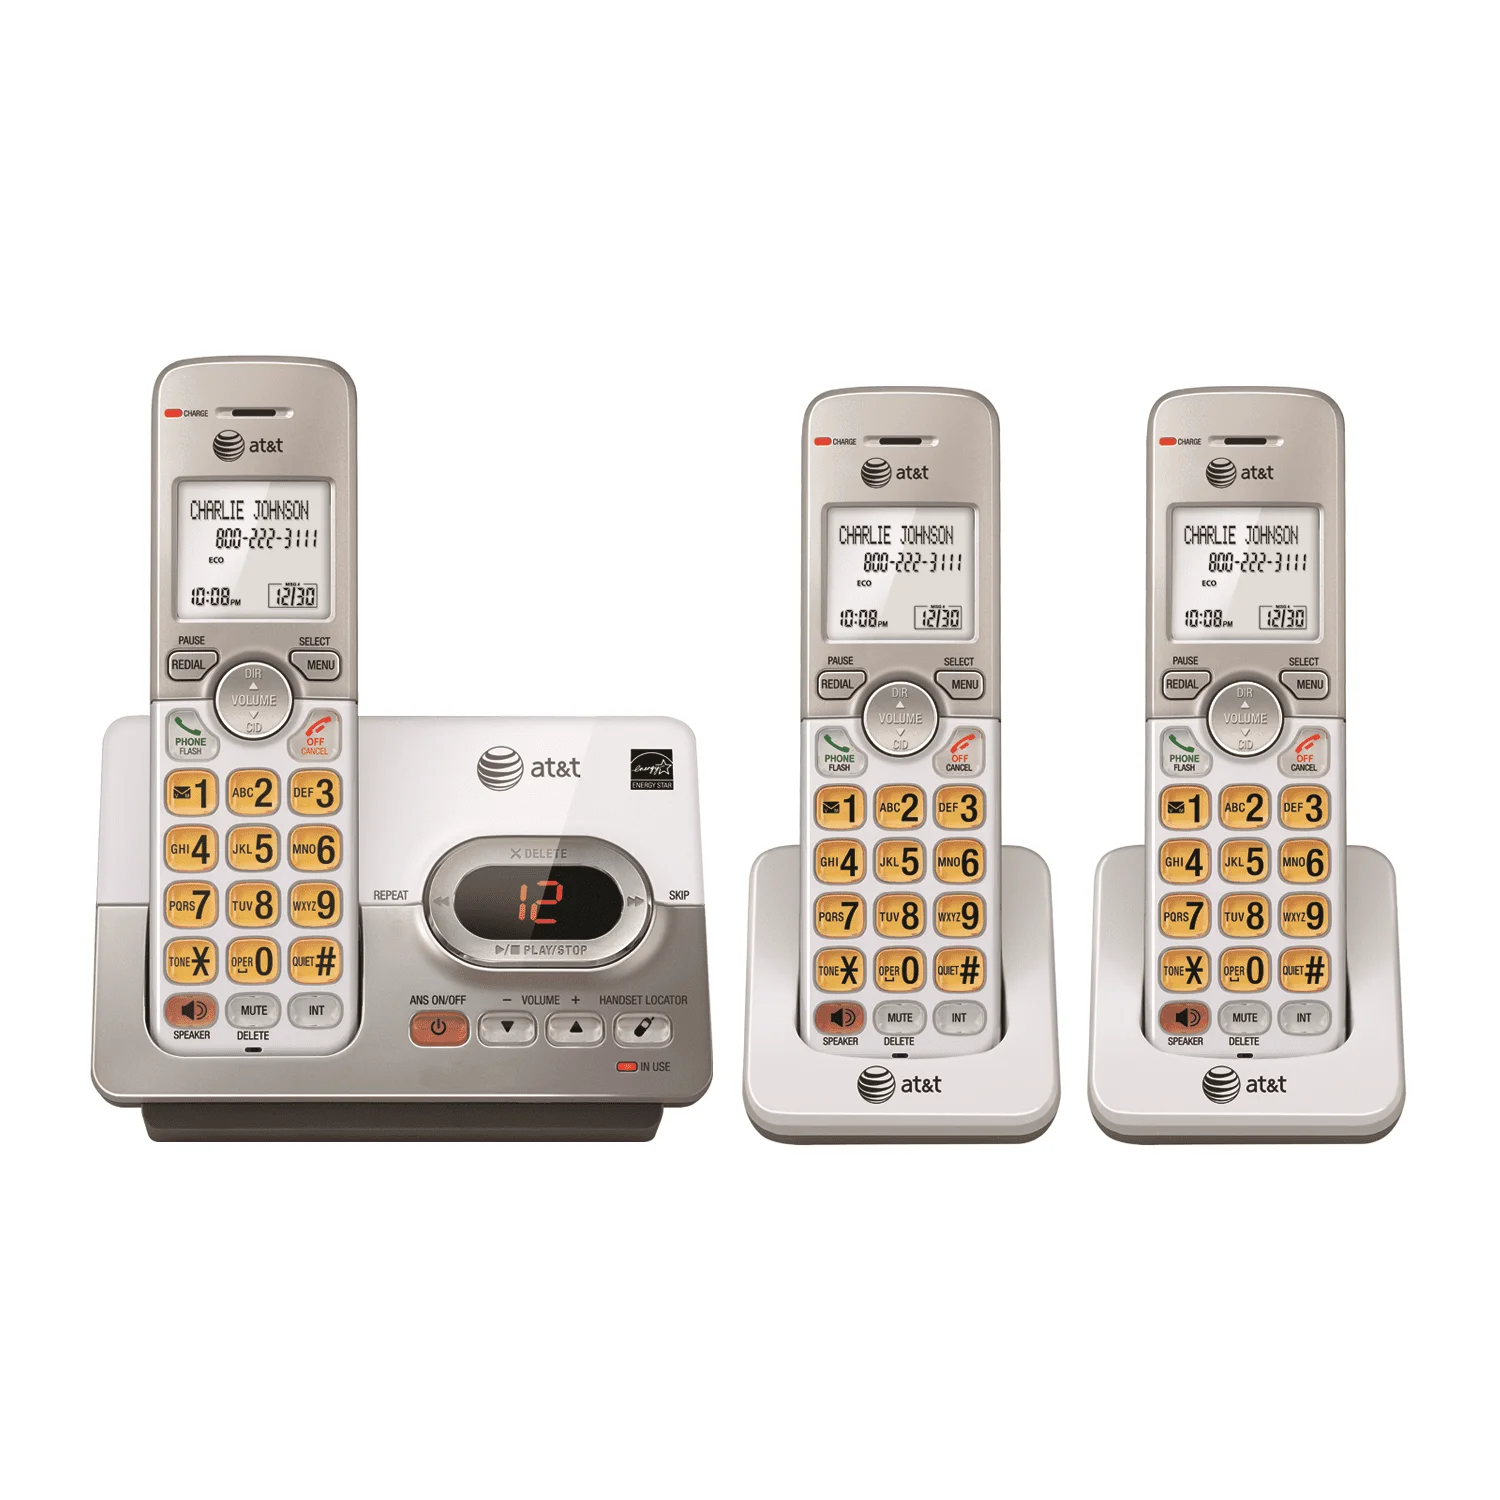 

EL52303 3-Handset Answering System with Caller ID & Call Waiting